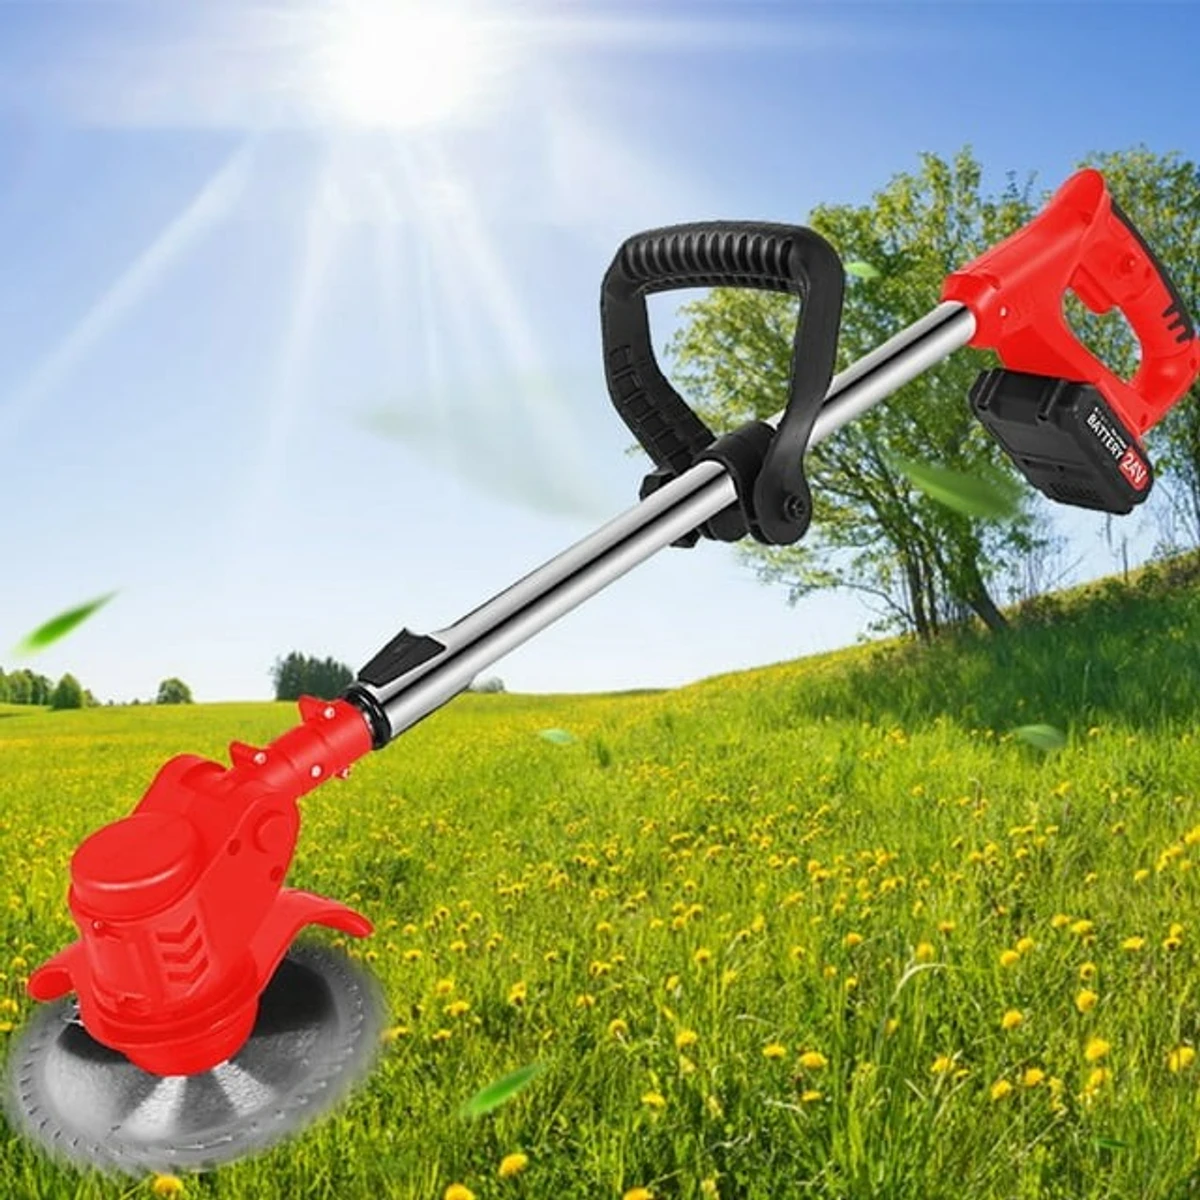 21V Cordless Grass String Trimmer 21000RPM Electric Lawn Mower Weed Adjustable Foldable Cutter Garden with 2 Battery